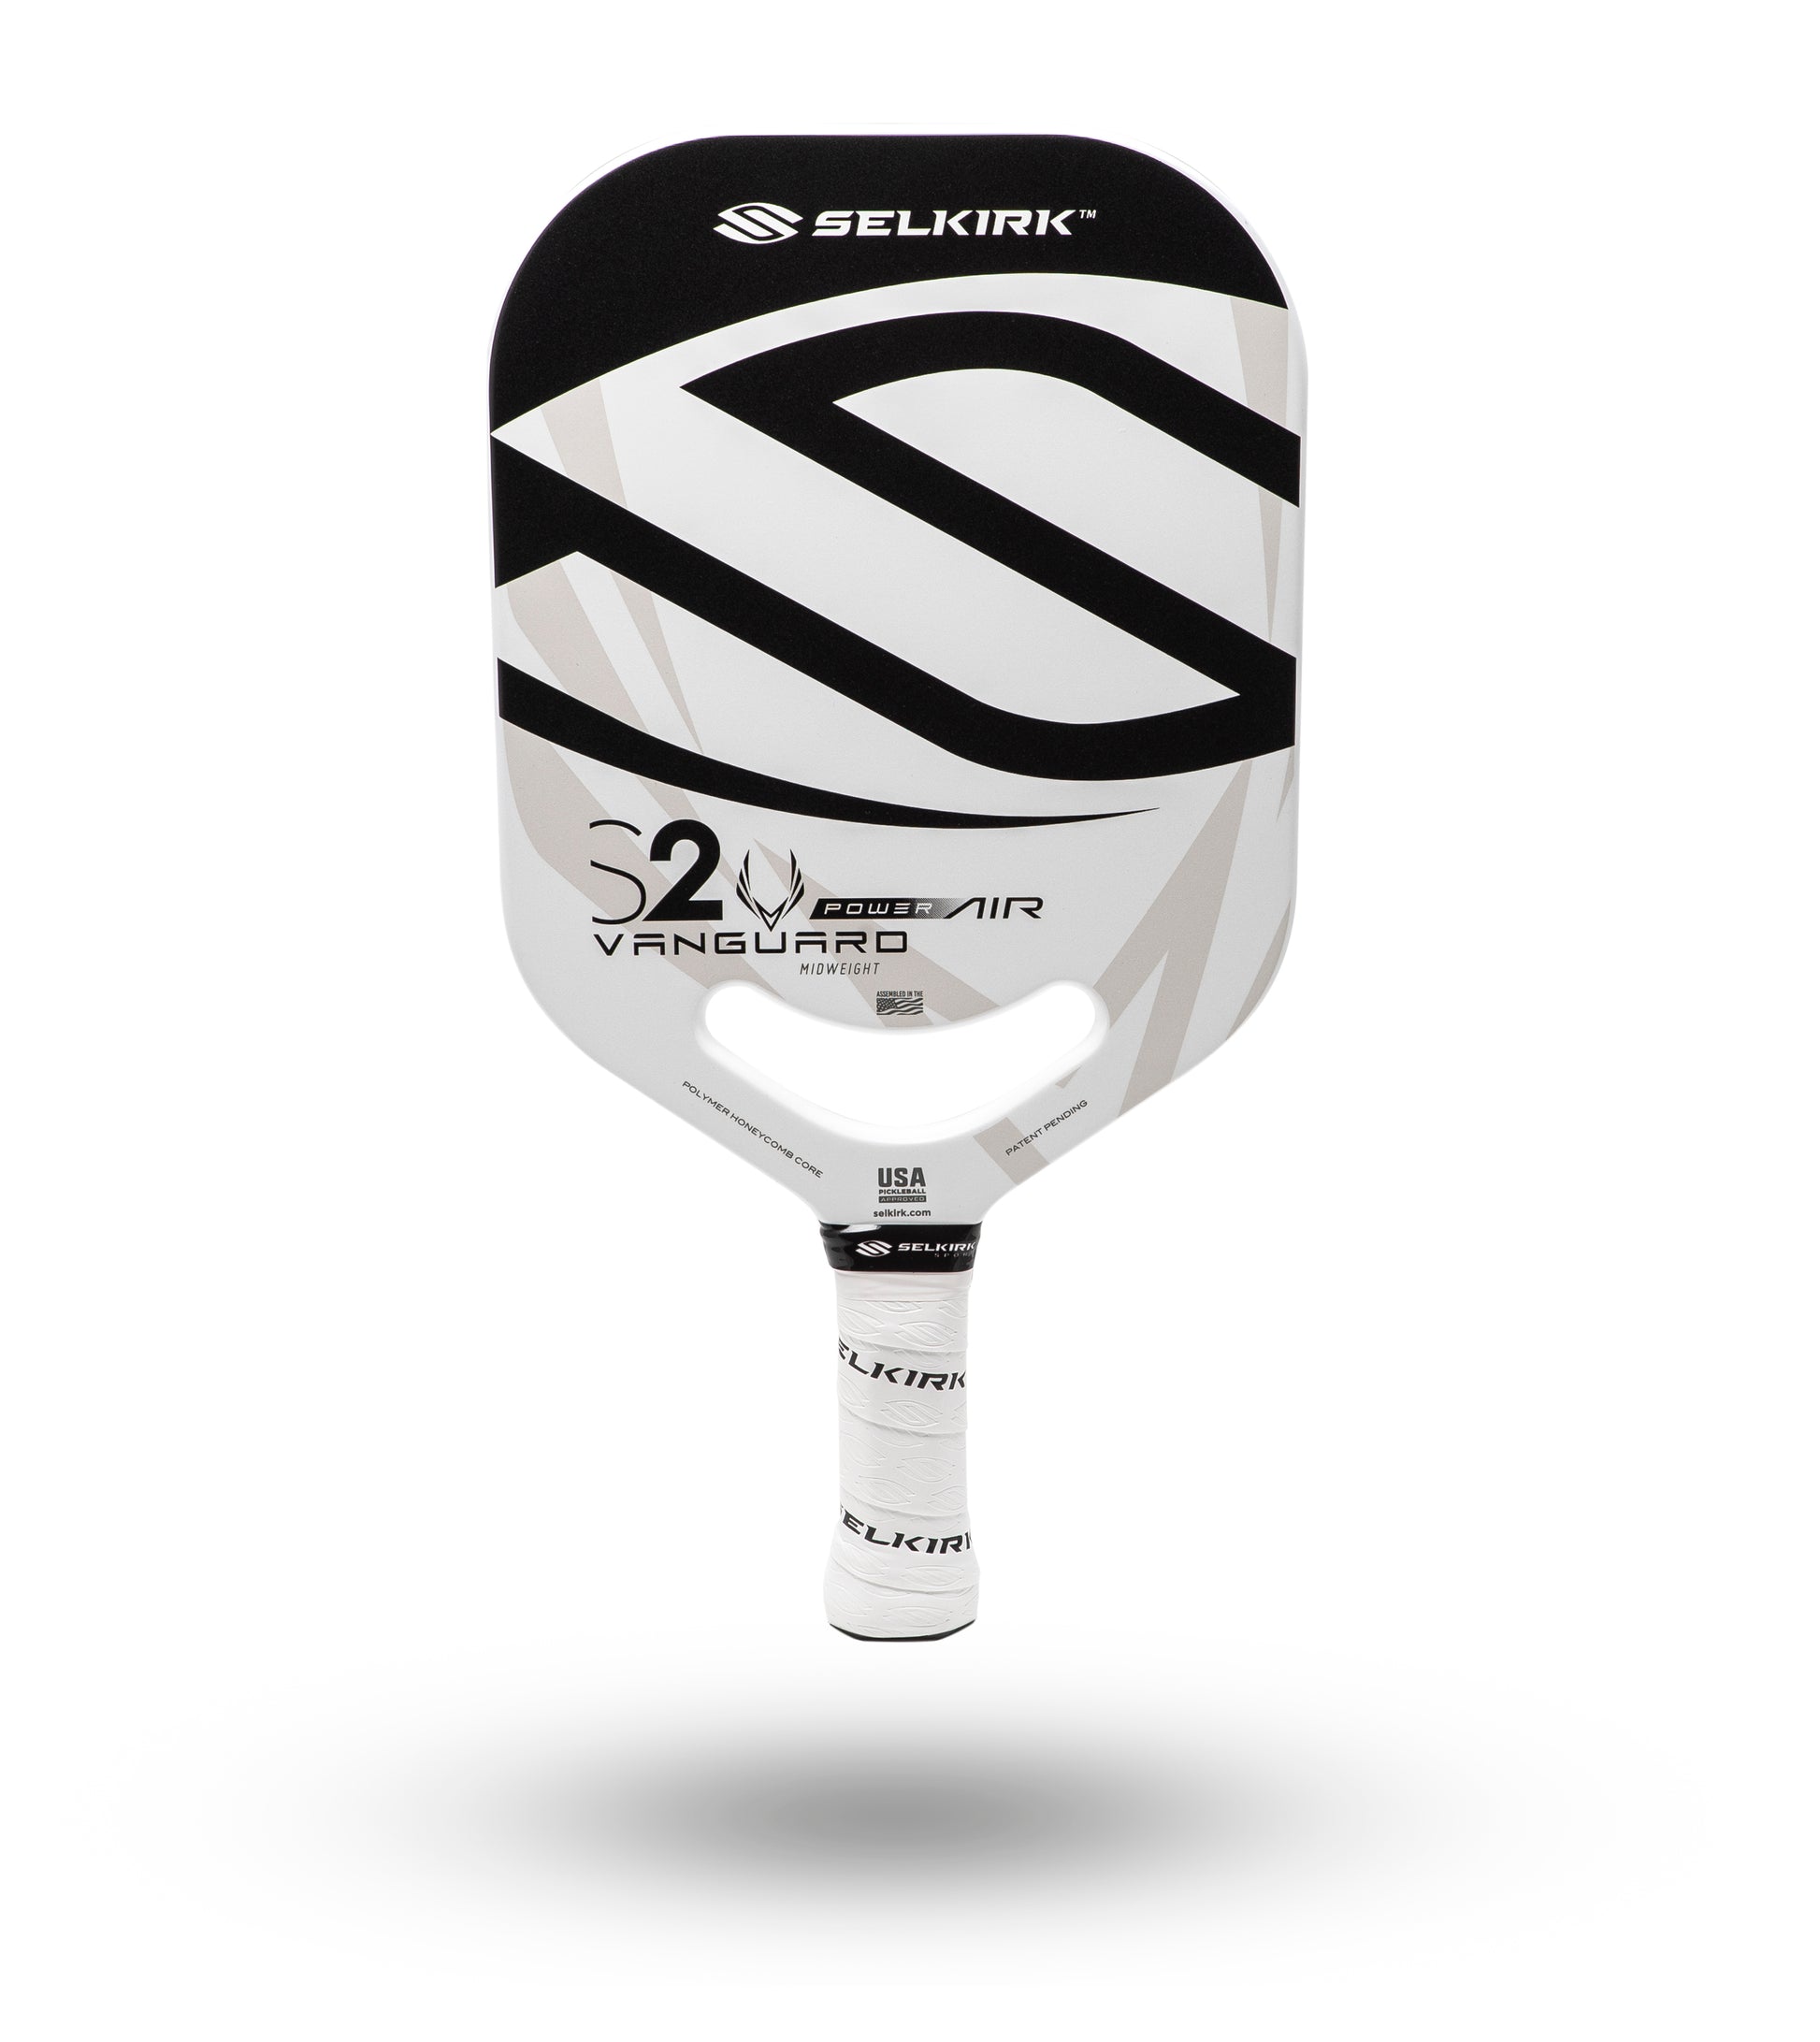 Selkirk Vanguard Power Air S2 Pickleball Paddle in black and white